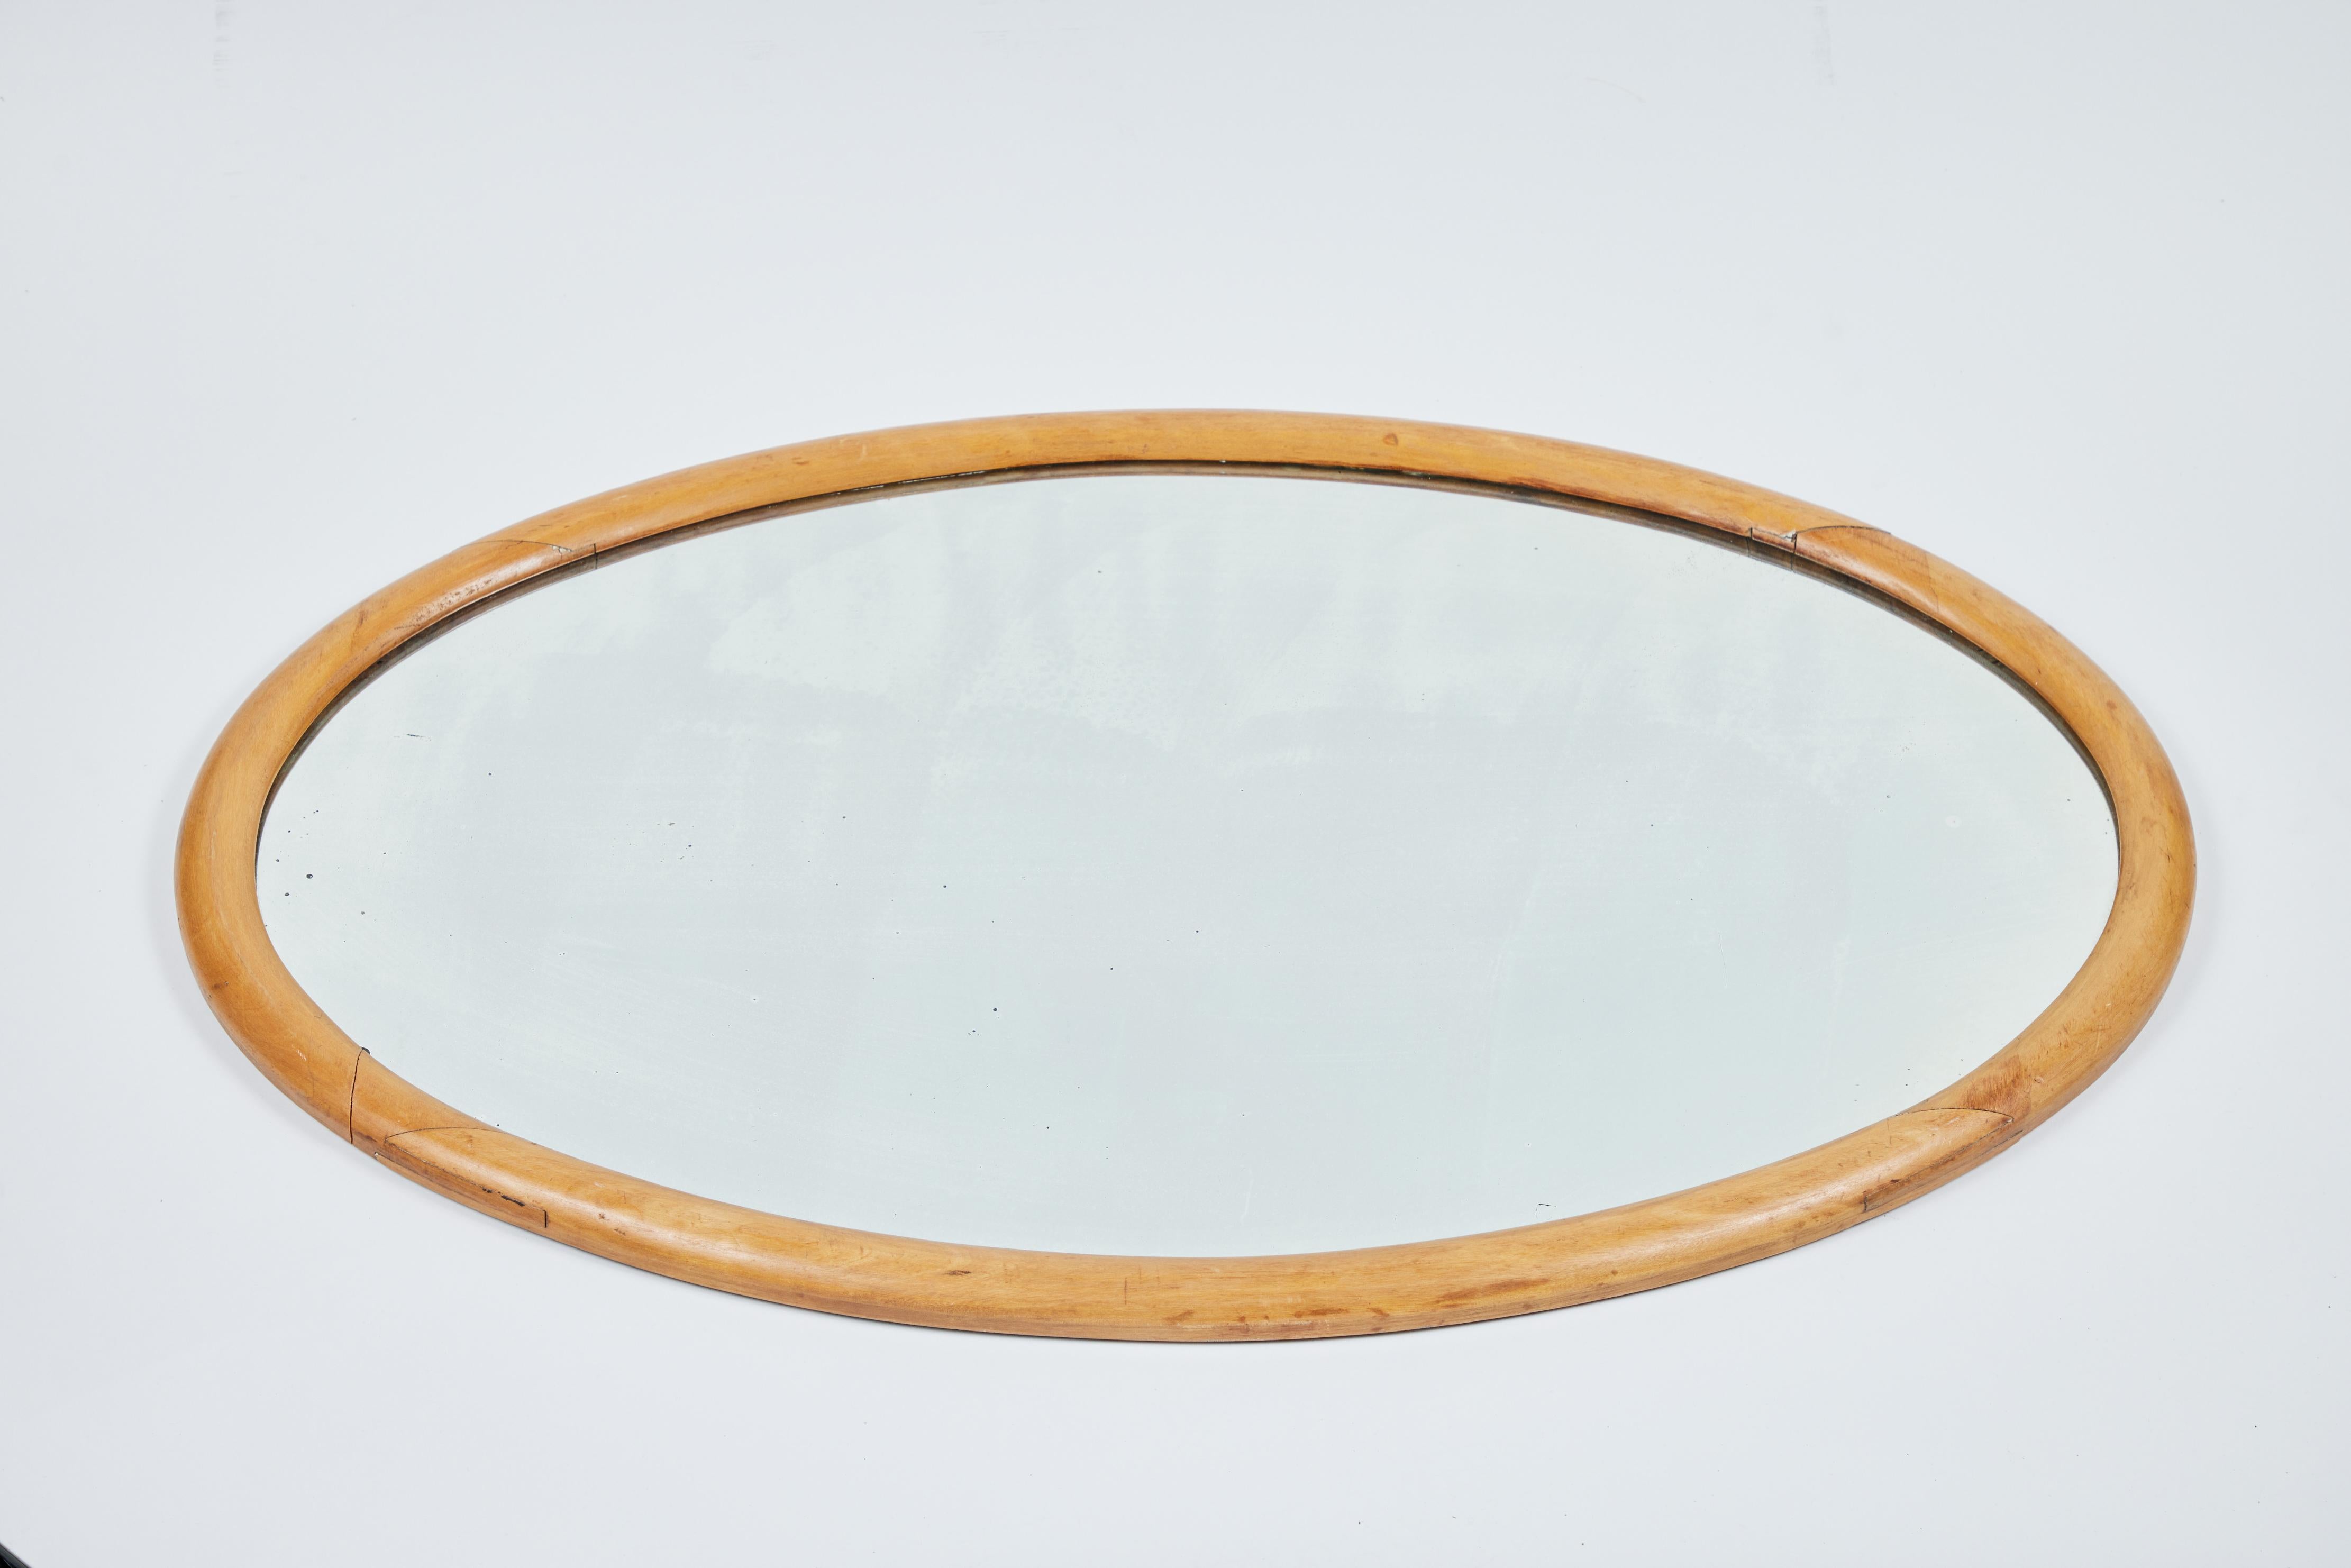 Antique oval wood frame mirror with original beveled glass.